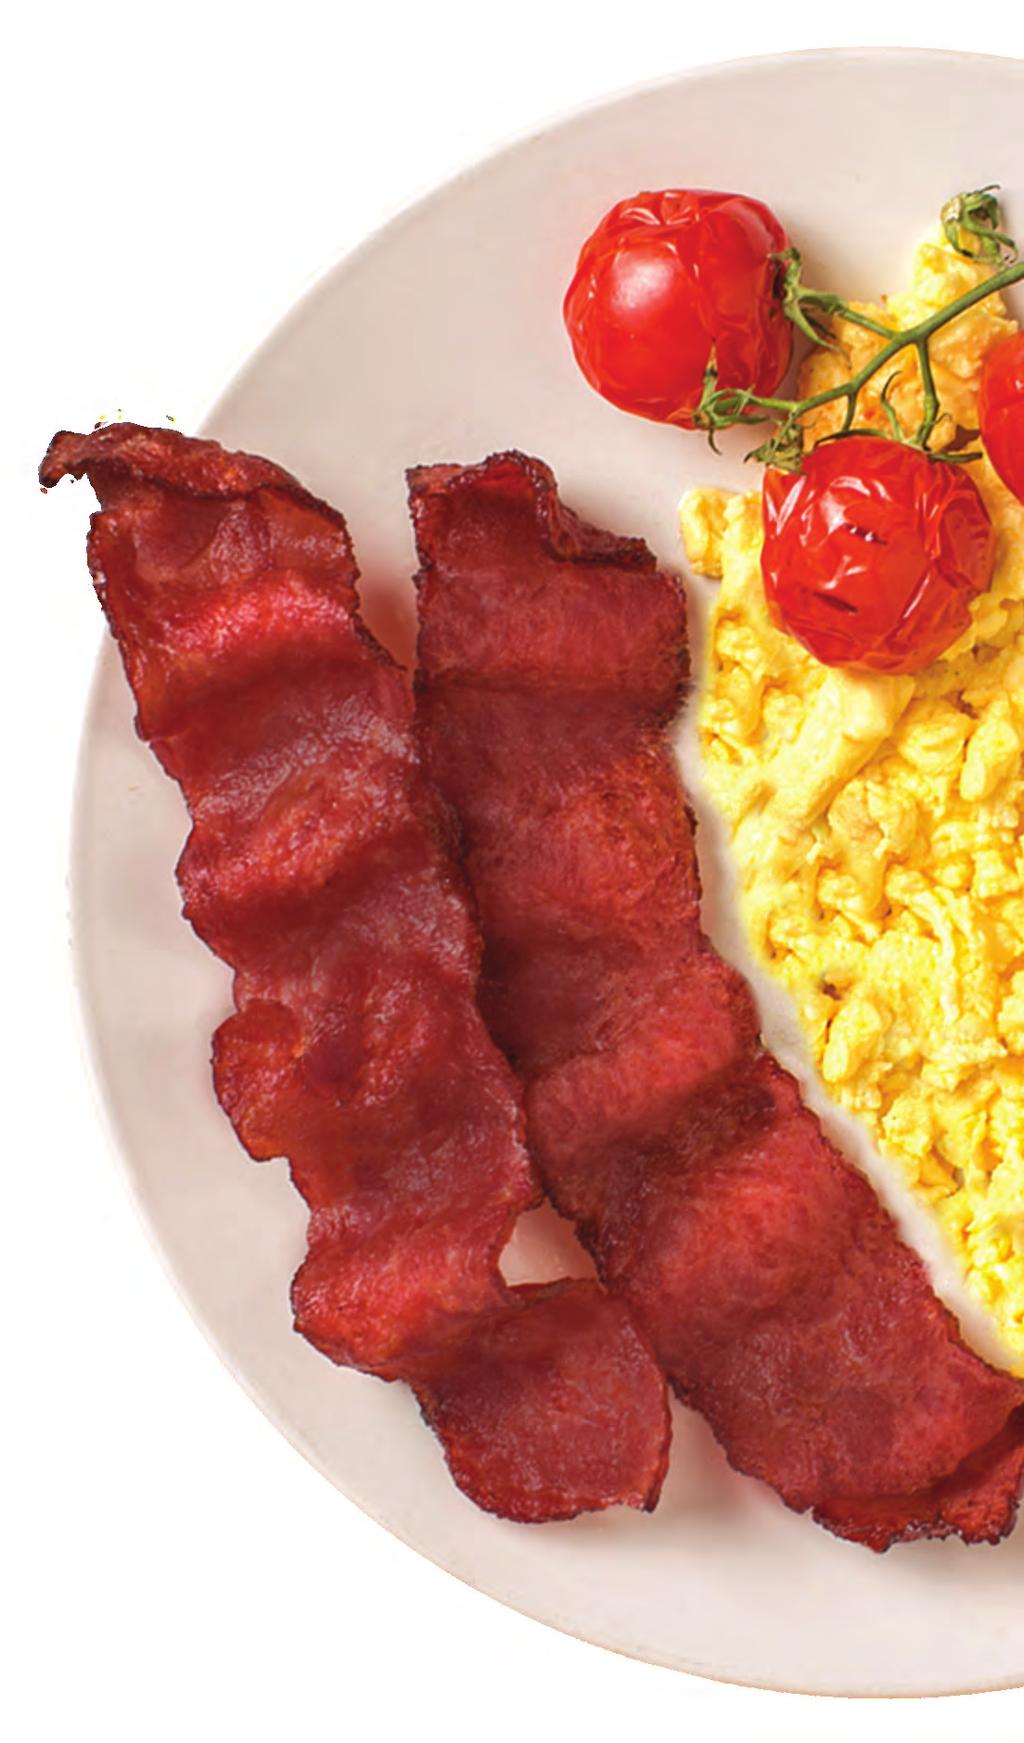 5 3/80 180 2070-820-000 Fully Cooked Turkey Bacon Crumbles 10/1 lbs 120 2280-809-000 Fully Cooked All Natural Uncured Turkey Bacon 3/80 180 All Natural Uncured Turkey Bacon